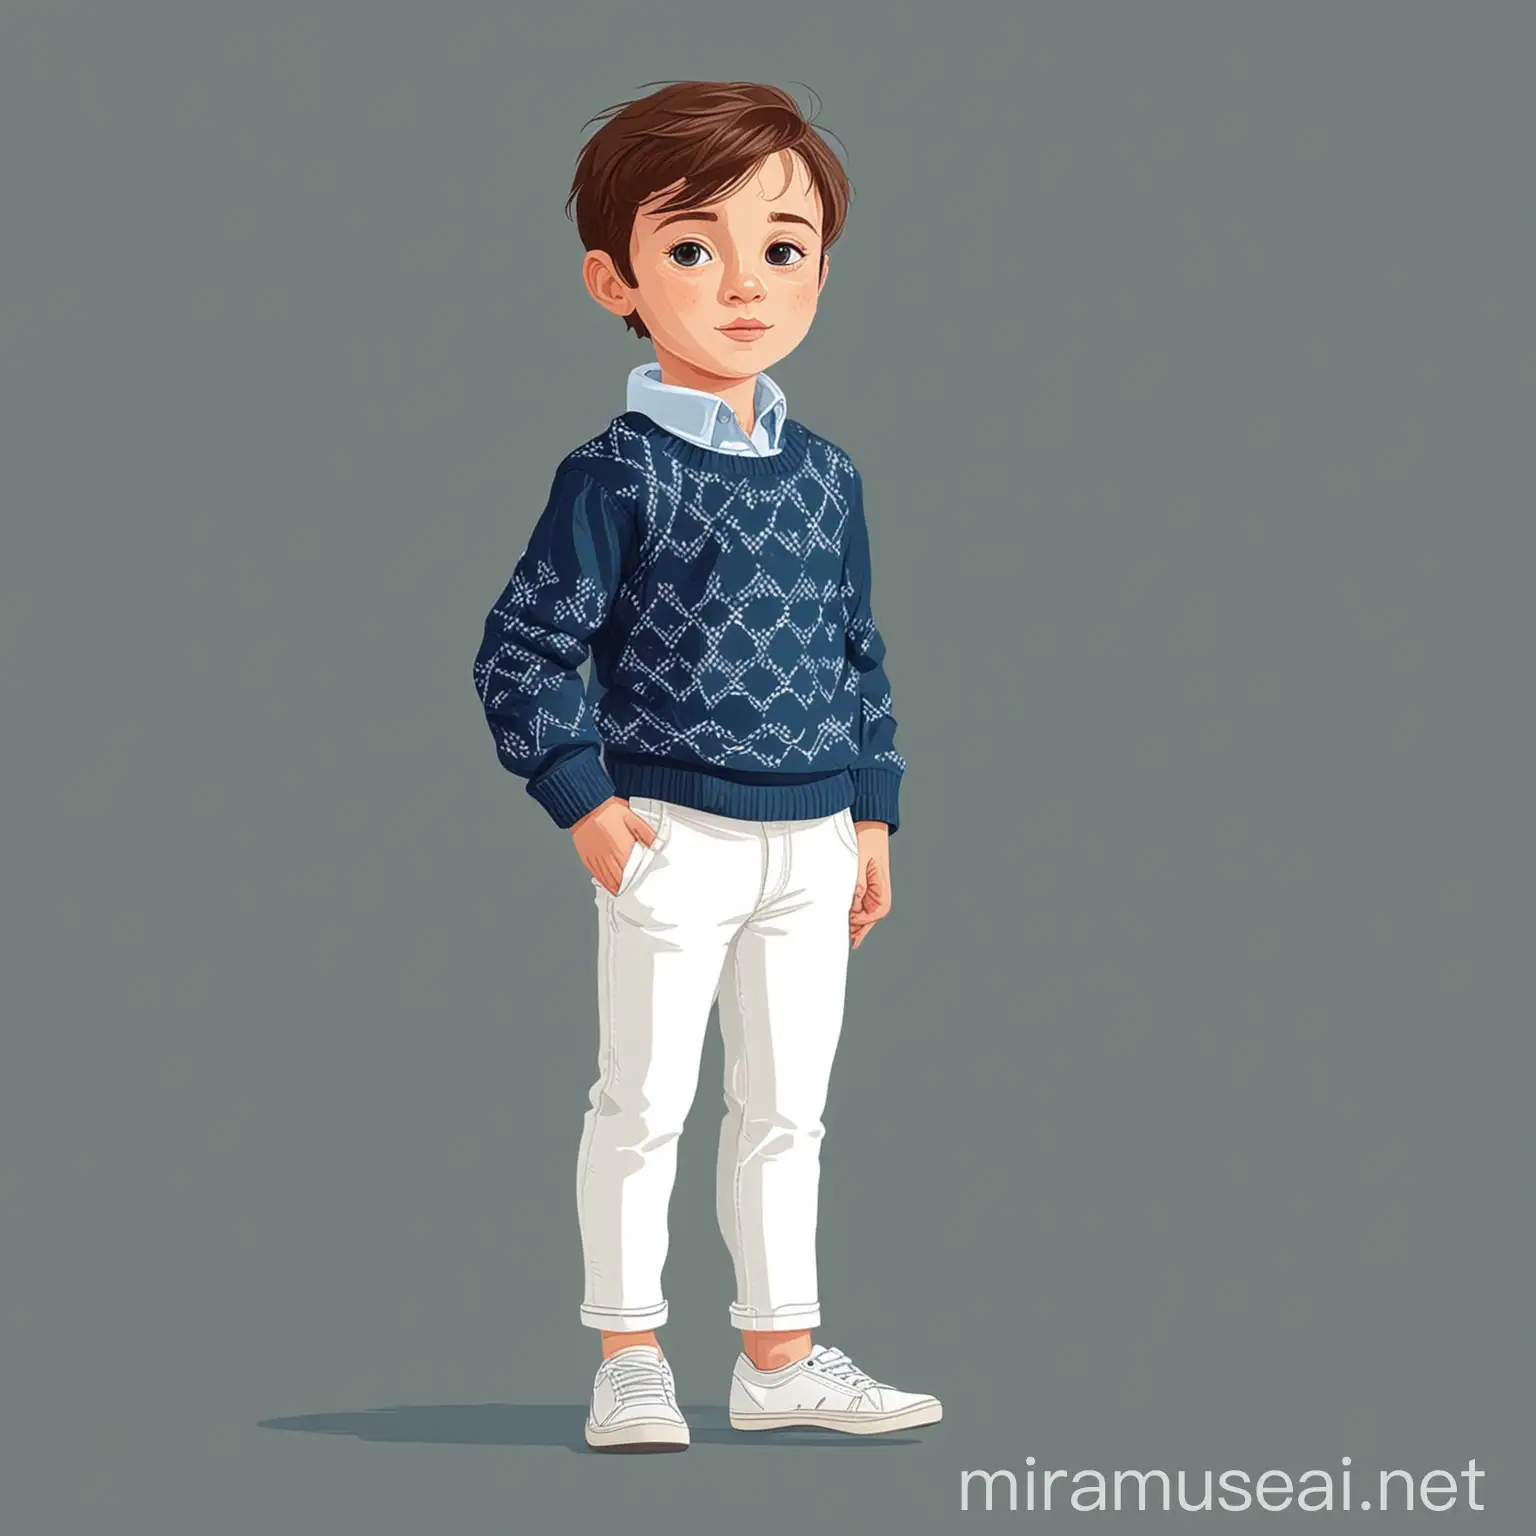 Young Boy in Blue Sweater and White Pants Flat Vector Style Illustration